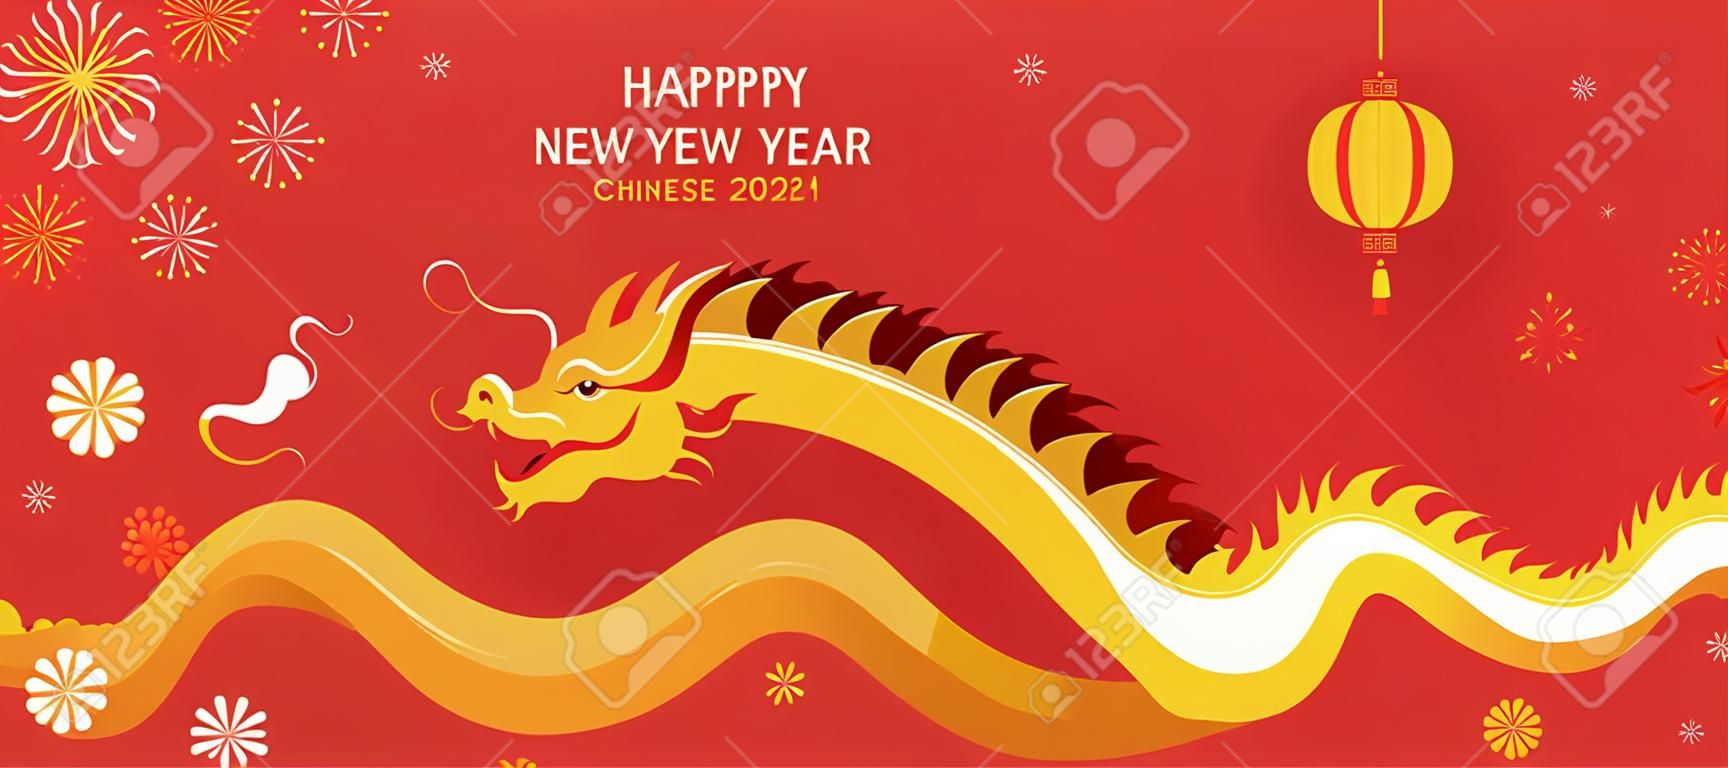 Chinese New Year Dragon Character Background, Holiday, Greeting and Celebration